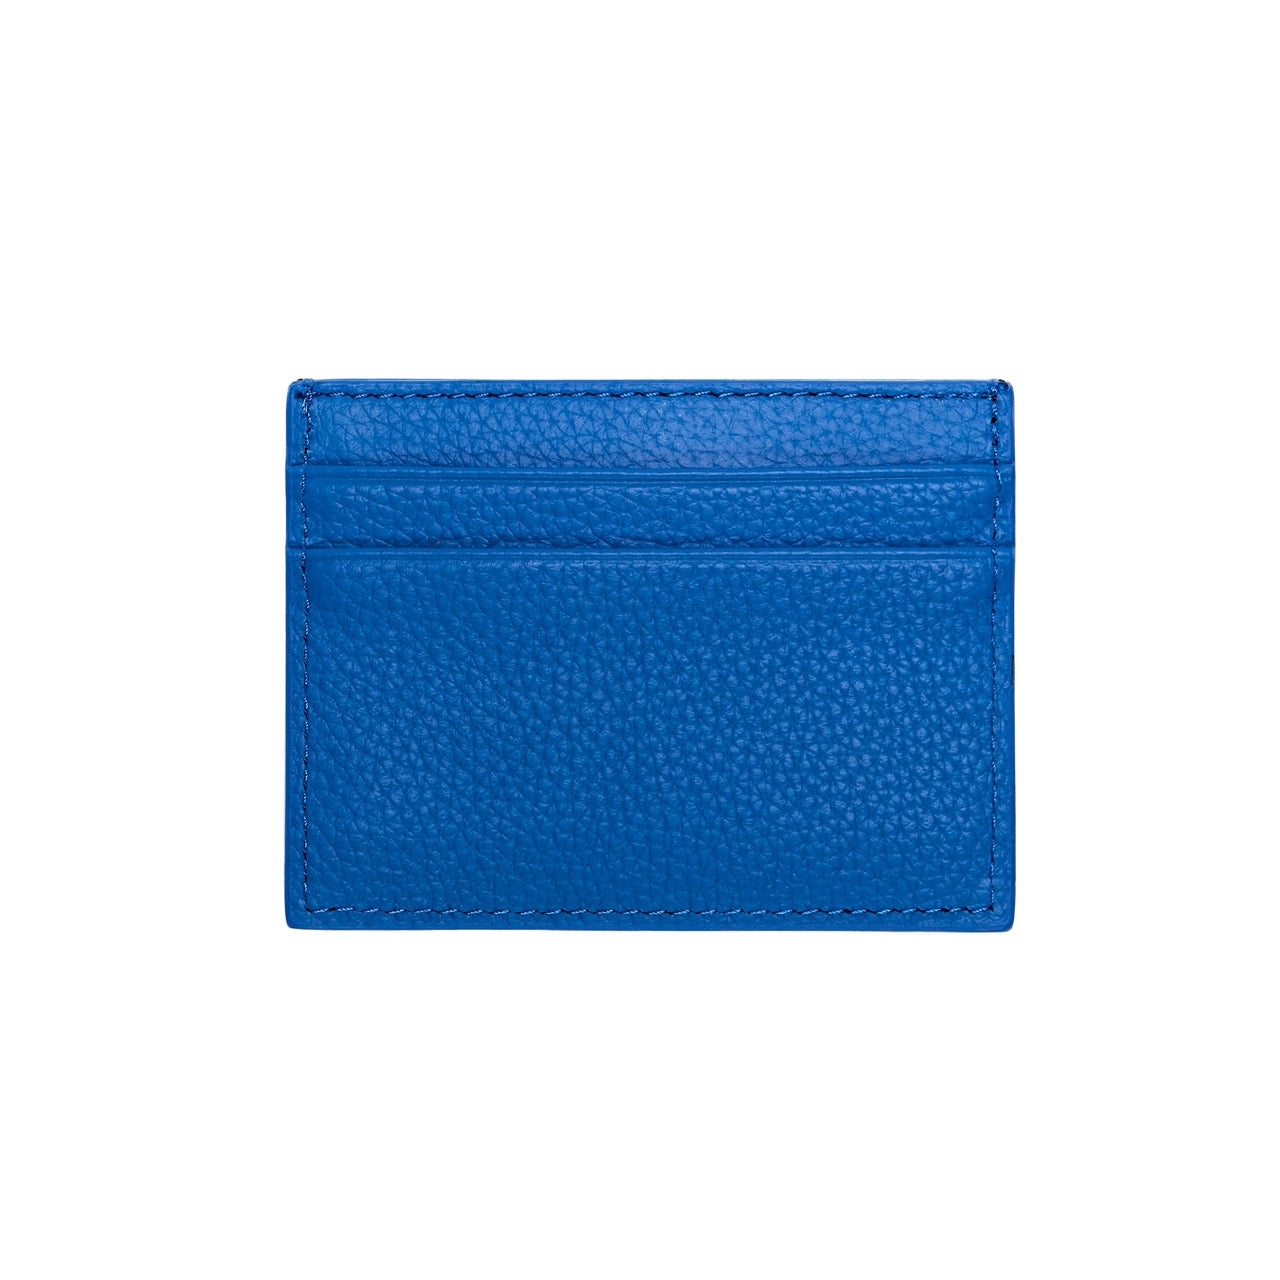 Bold in Blue, Strong in Security: Ivory & Ebony Wallet - Crafted from 100% Genuine Leather, RFID Blocking - Make a Statement with Uncompromised Style and Safety